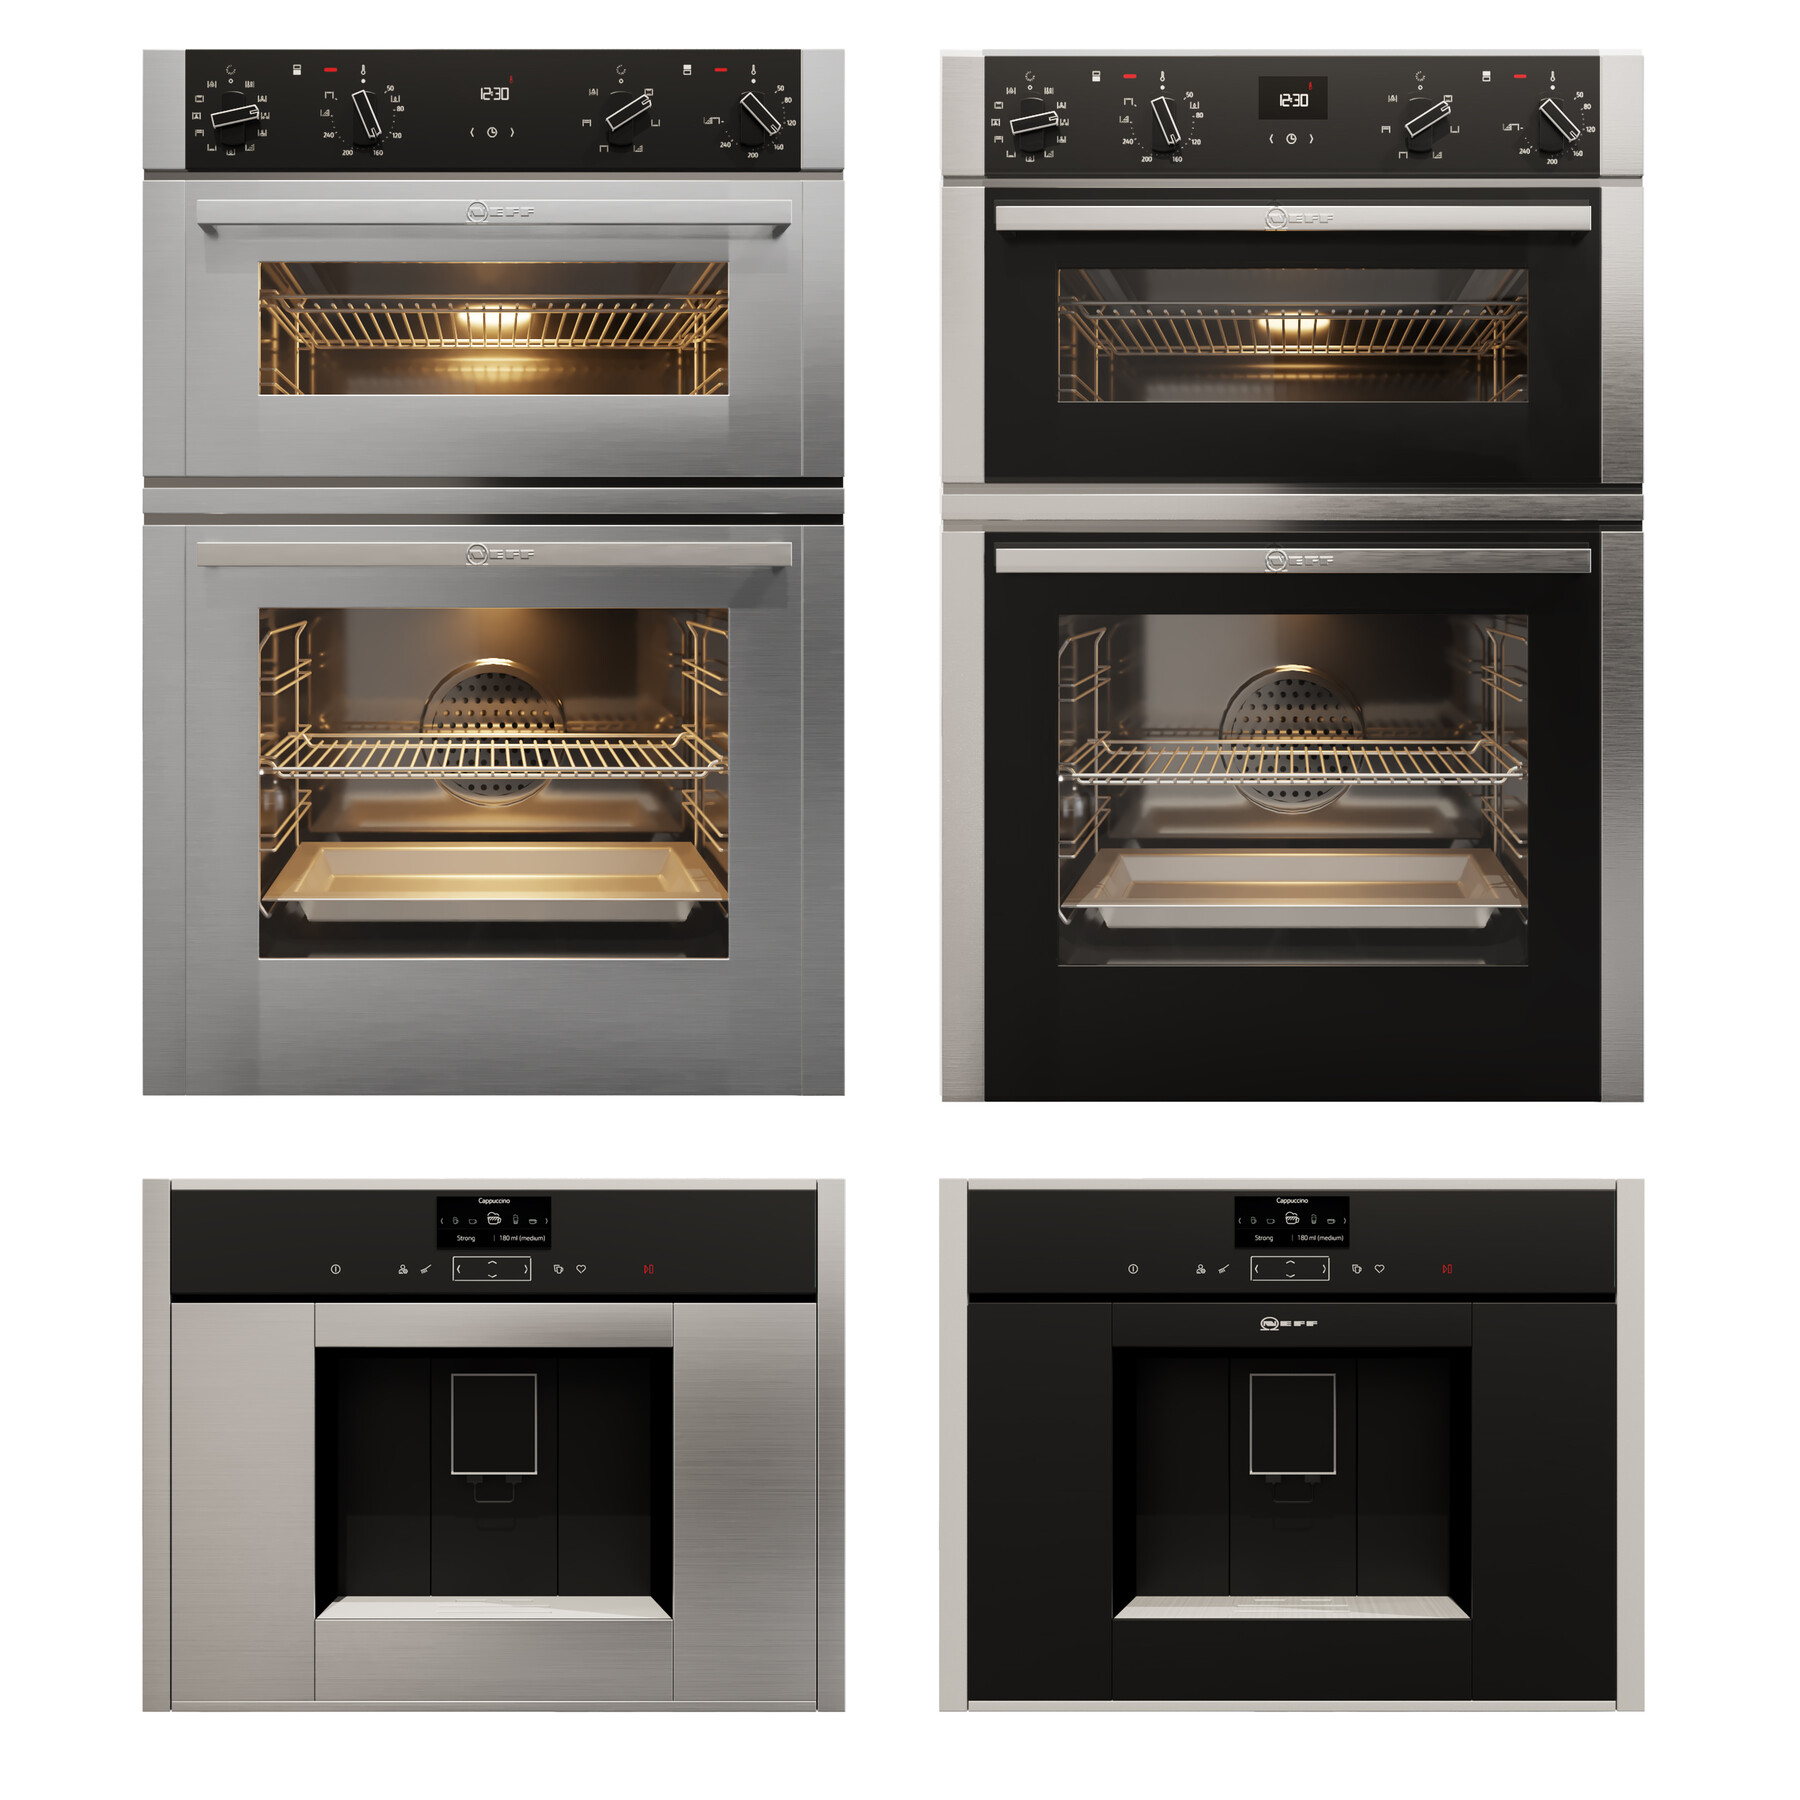 Bosch Appliance collection. Neff c17wr00g0 Vertical combination with Oven. Neff c17wr00g0 in combination with Oven. Бош и Нефф.